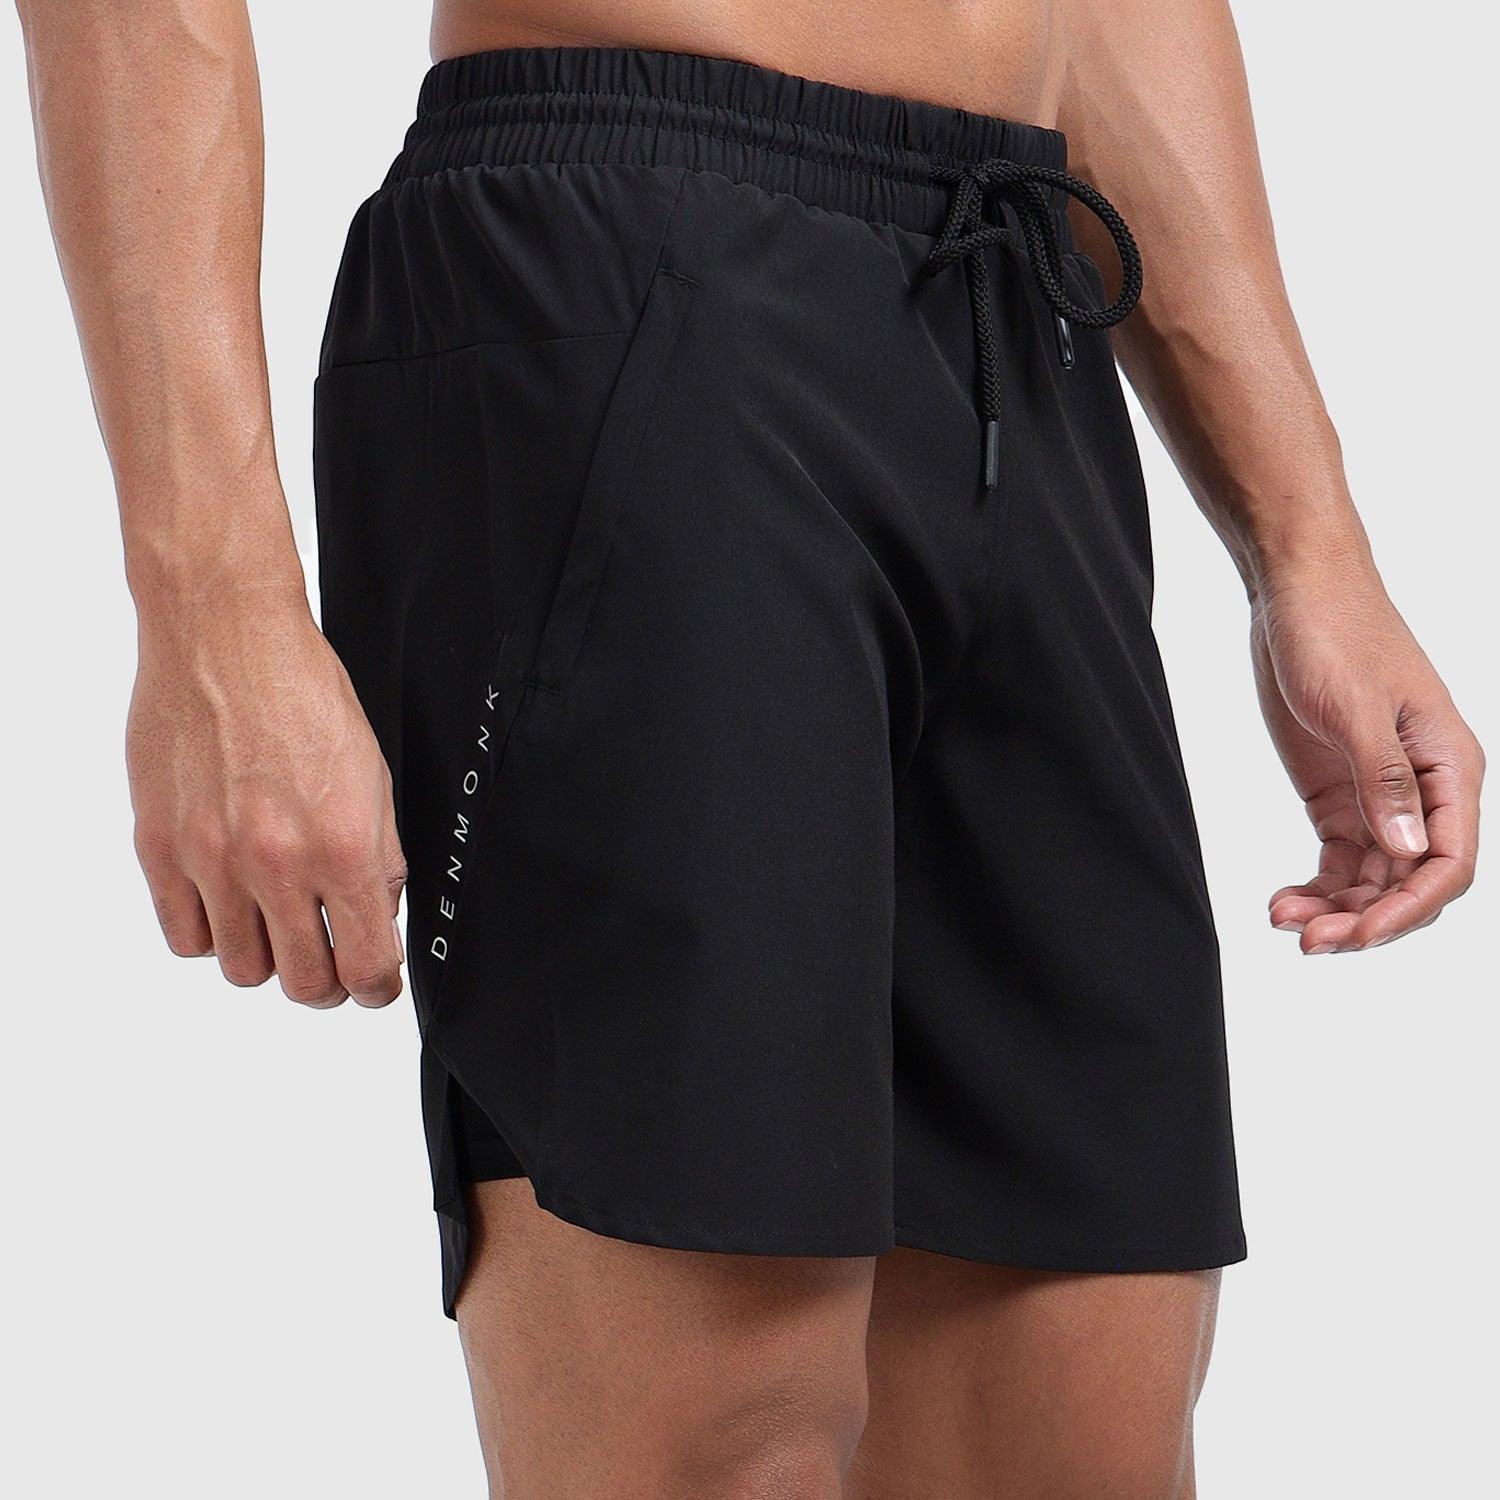 Denmonk's fashionable 2-IN-1 SHORTS black shorts for men will boost your level of gym fitness.